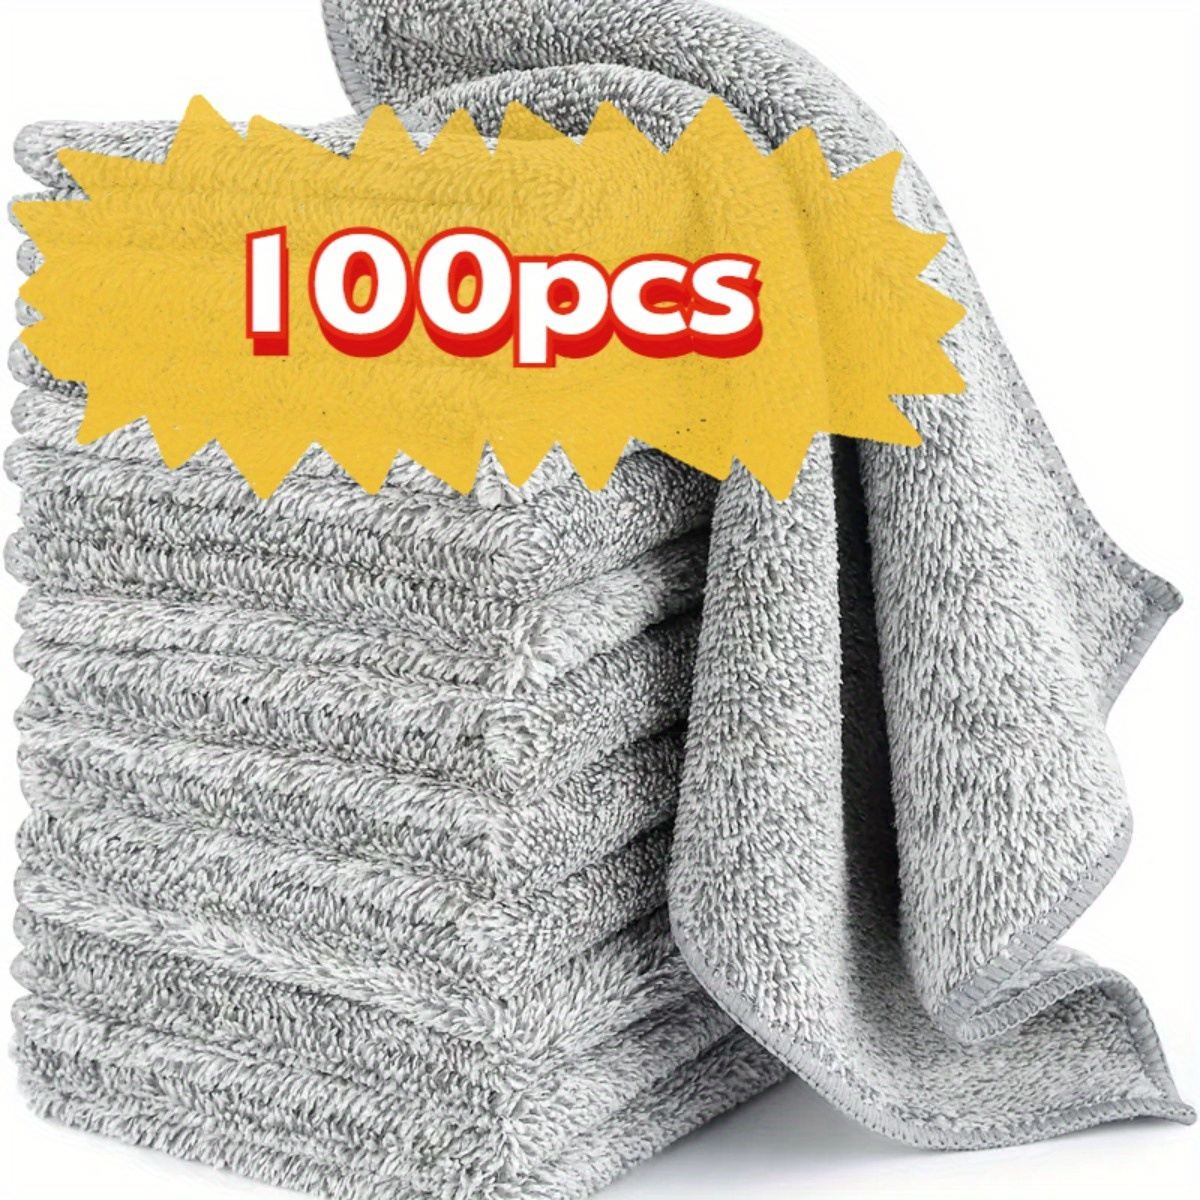 

100/50-piece Premium Grey Microfiber Cleaning Cloths - Ultra Absorbent, Lint-free & Reusable Towels For Home, Kitchen, Bathroom, And Auto - Soft, Durable & Machine Washable